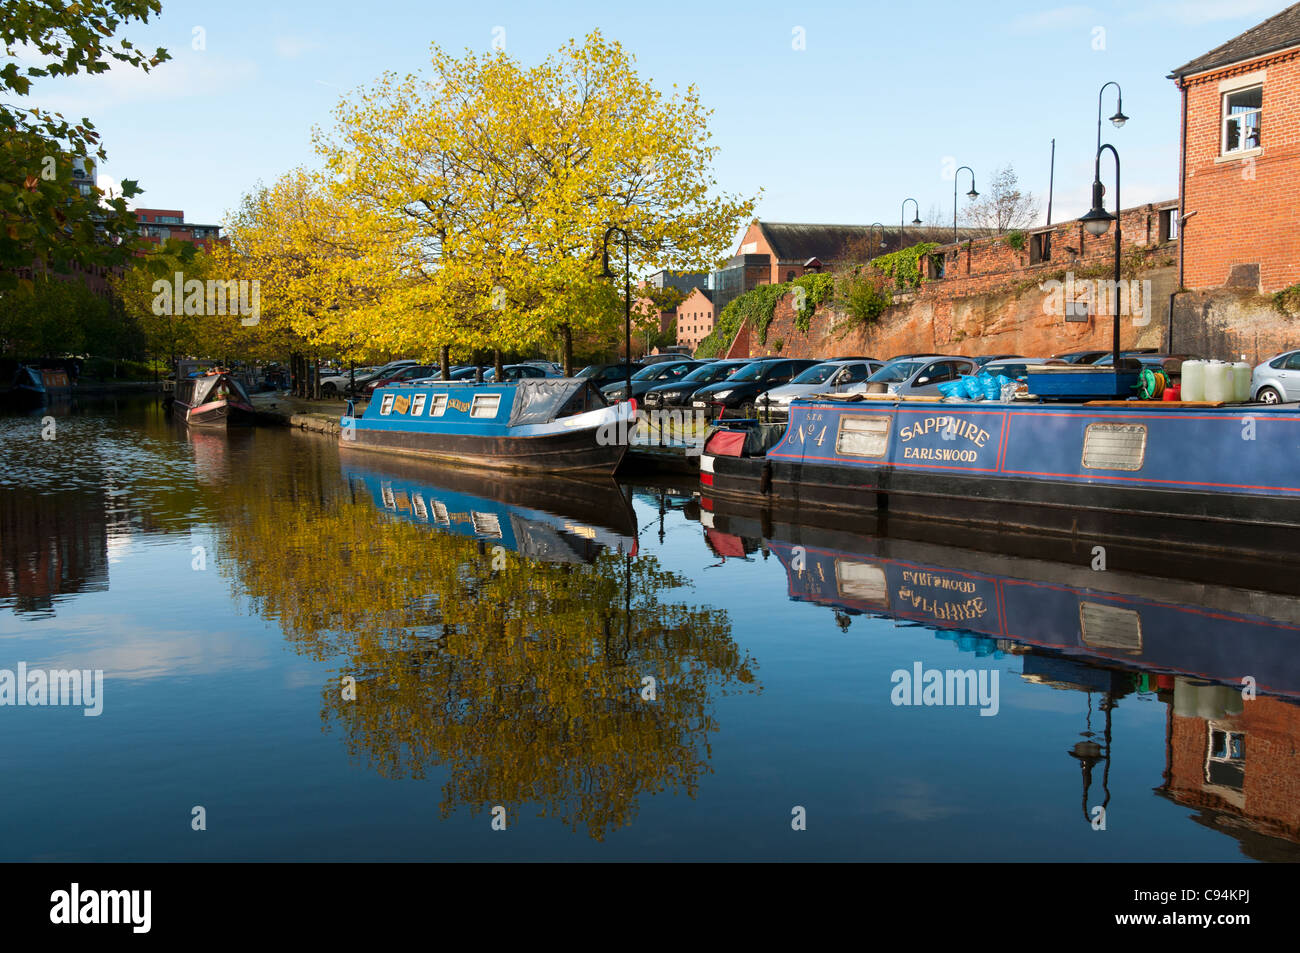 Narrowboats on the Bridgewater Canal at Castlefield Basin, Manchester, England, UK. Stock Photo